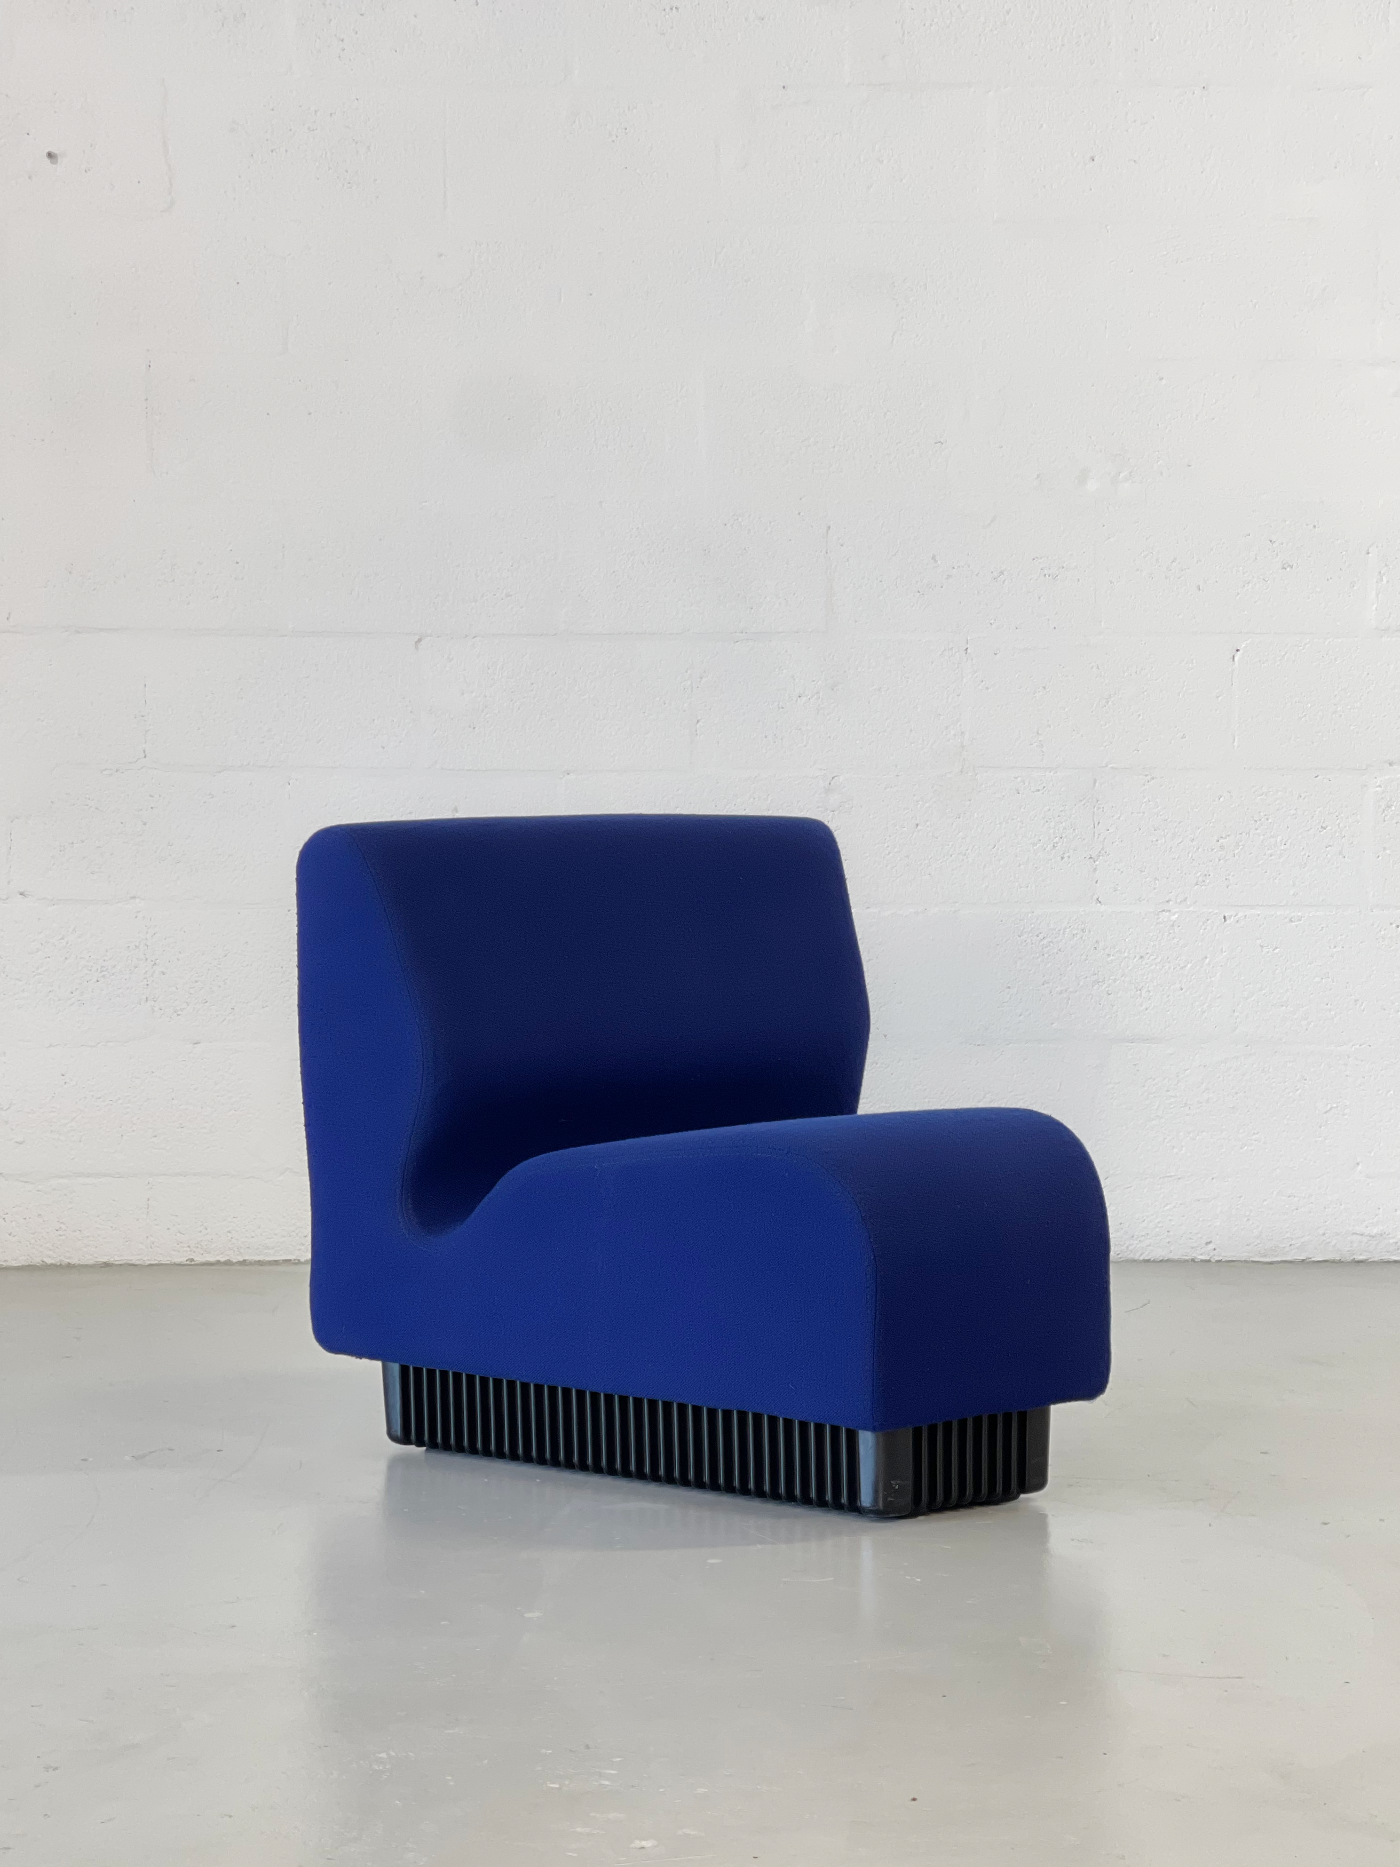 1970s Blue Slipper Chair by Don Chadwick for Herman Miller